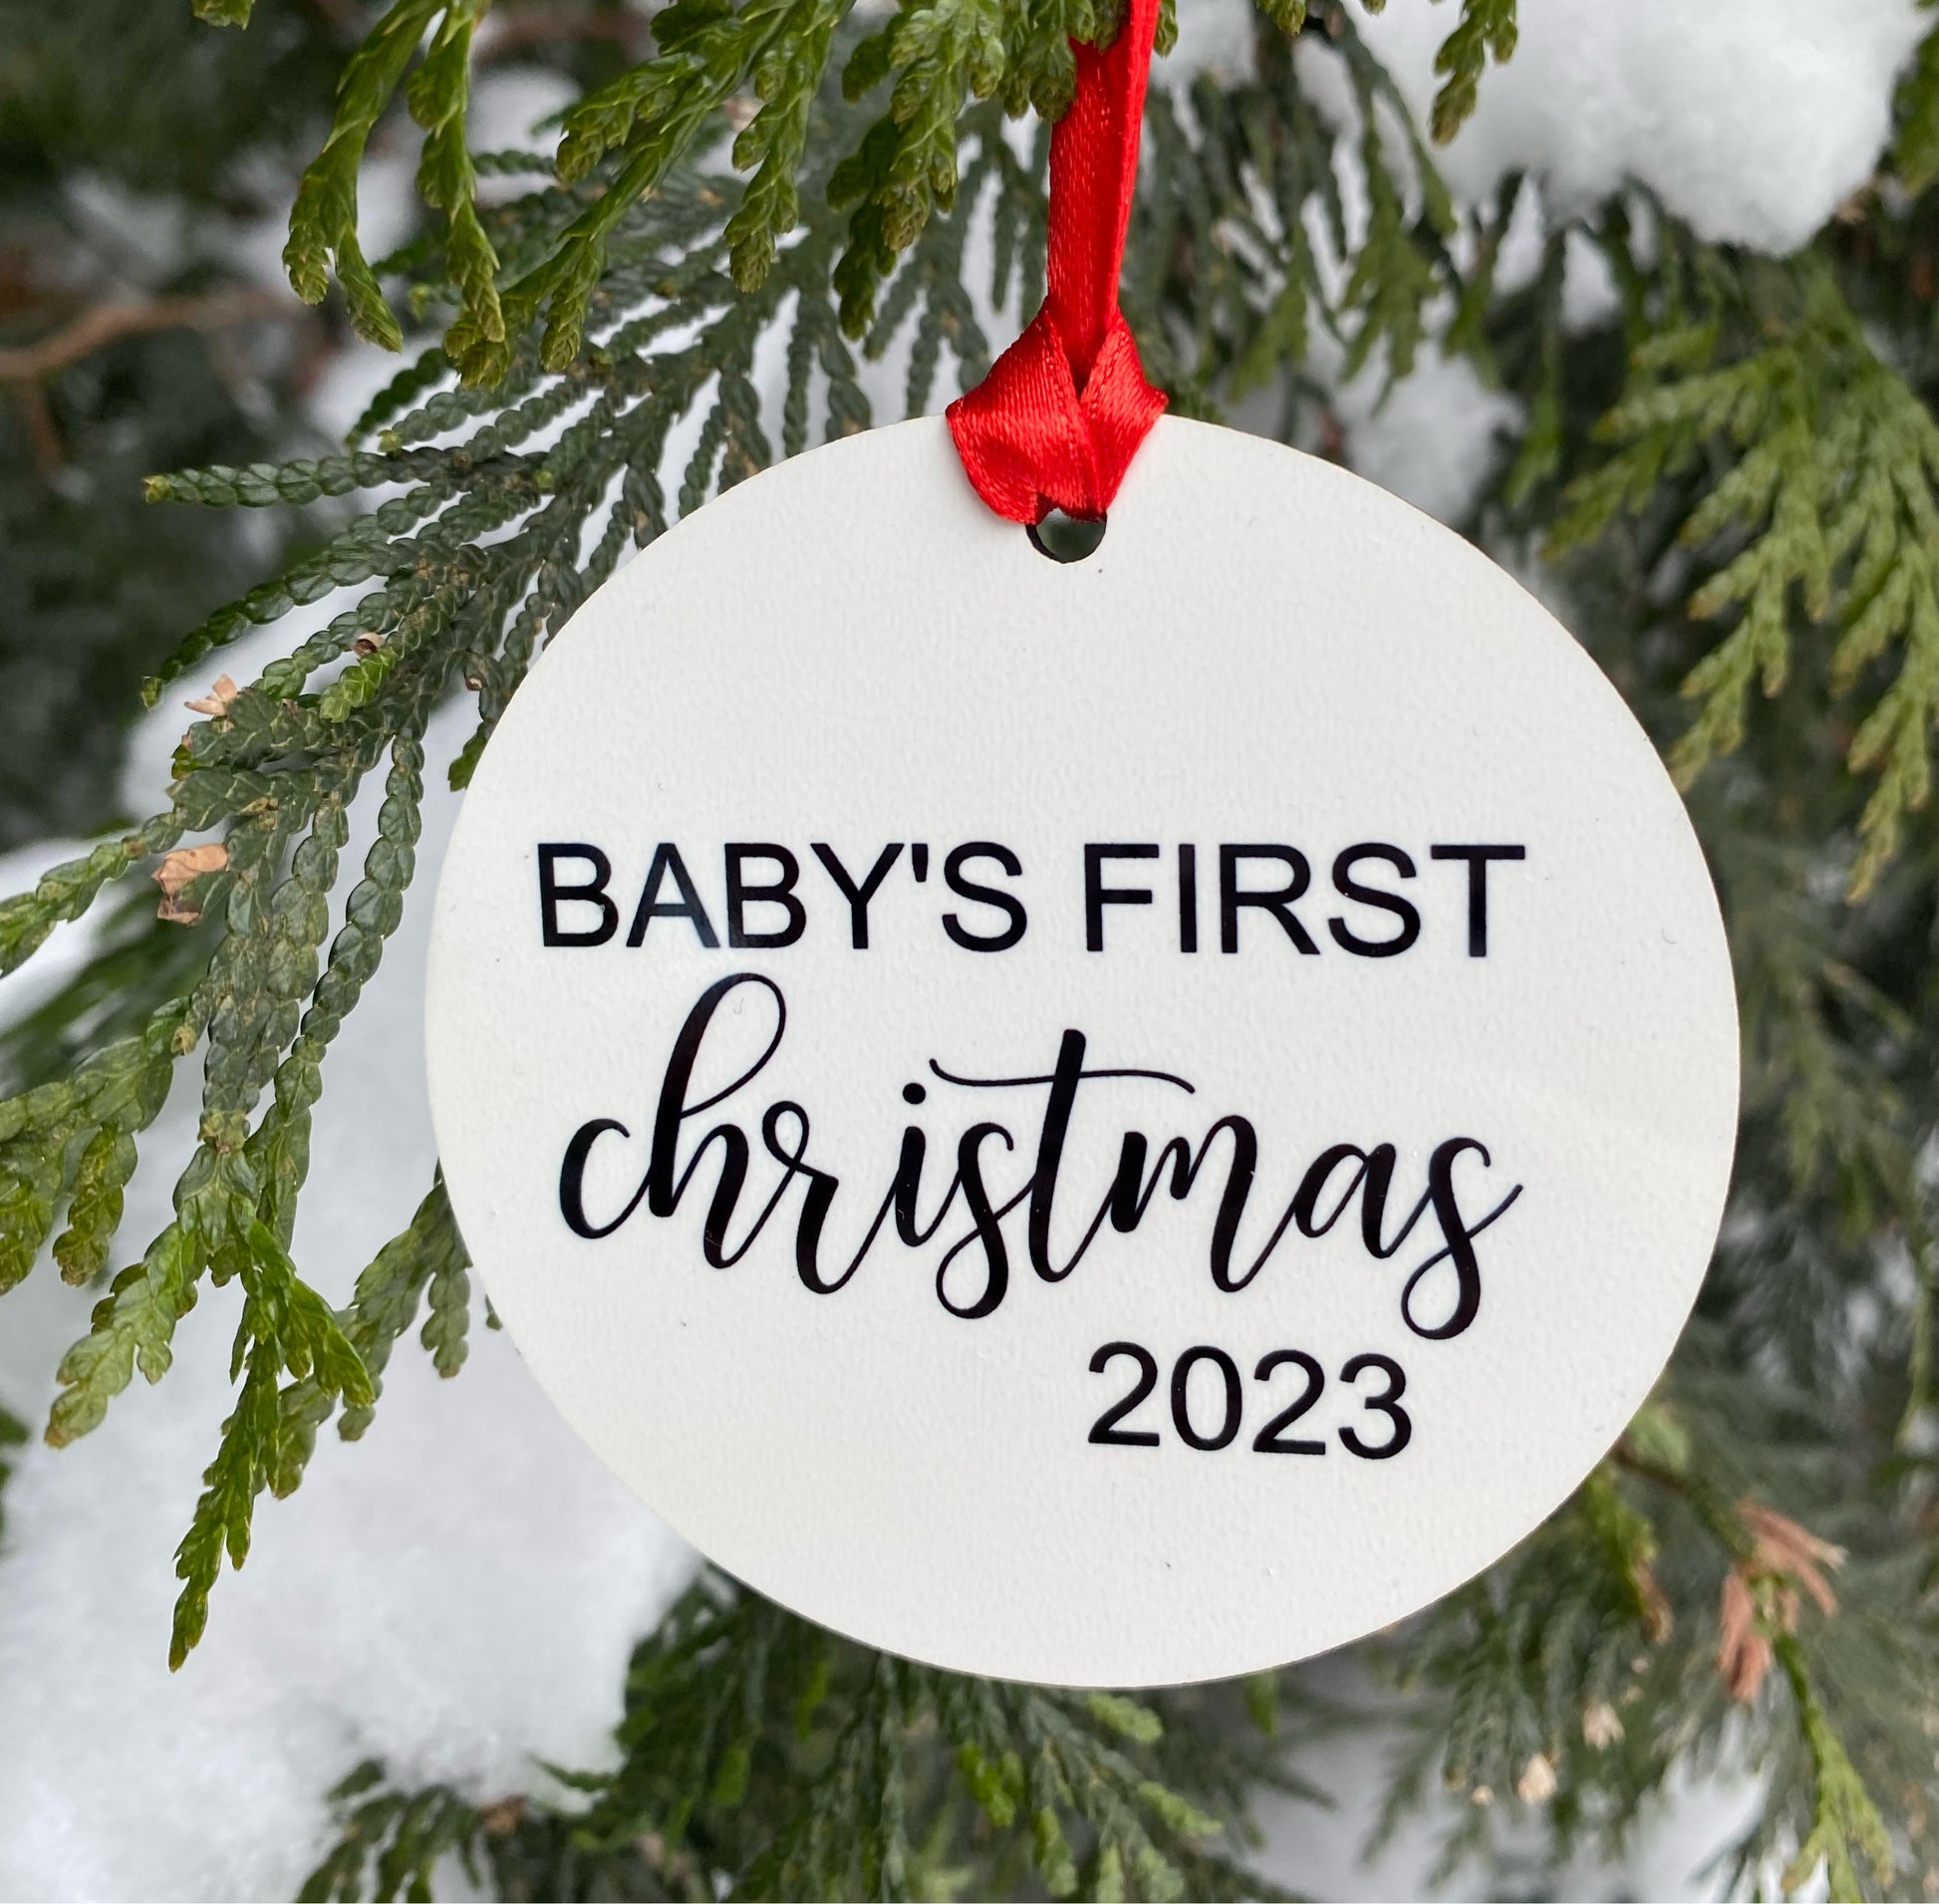 baby's first Christmas 2023